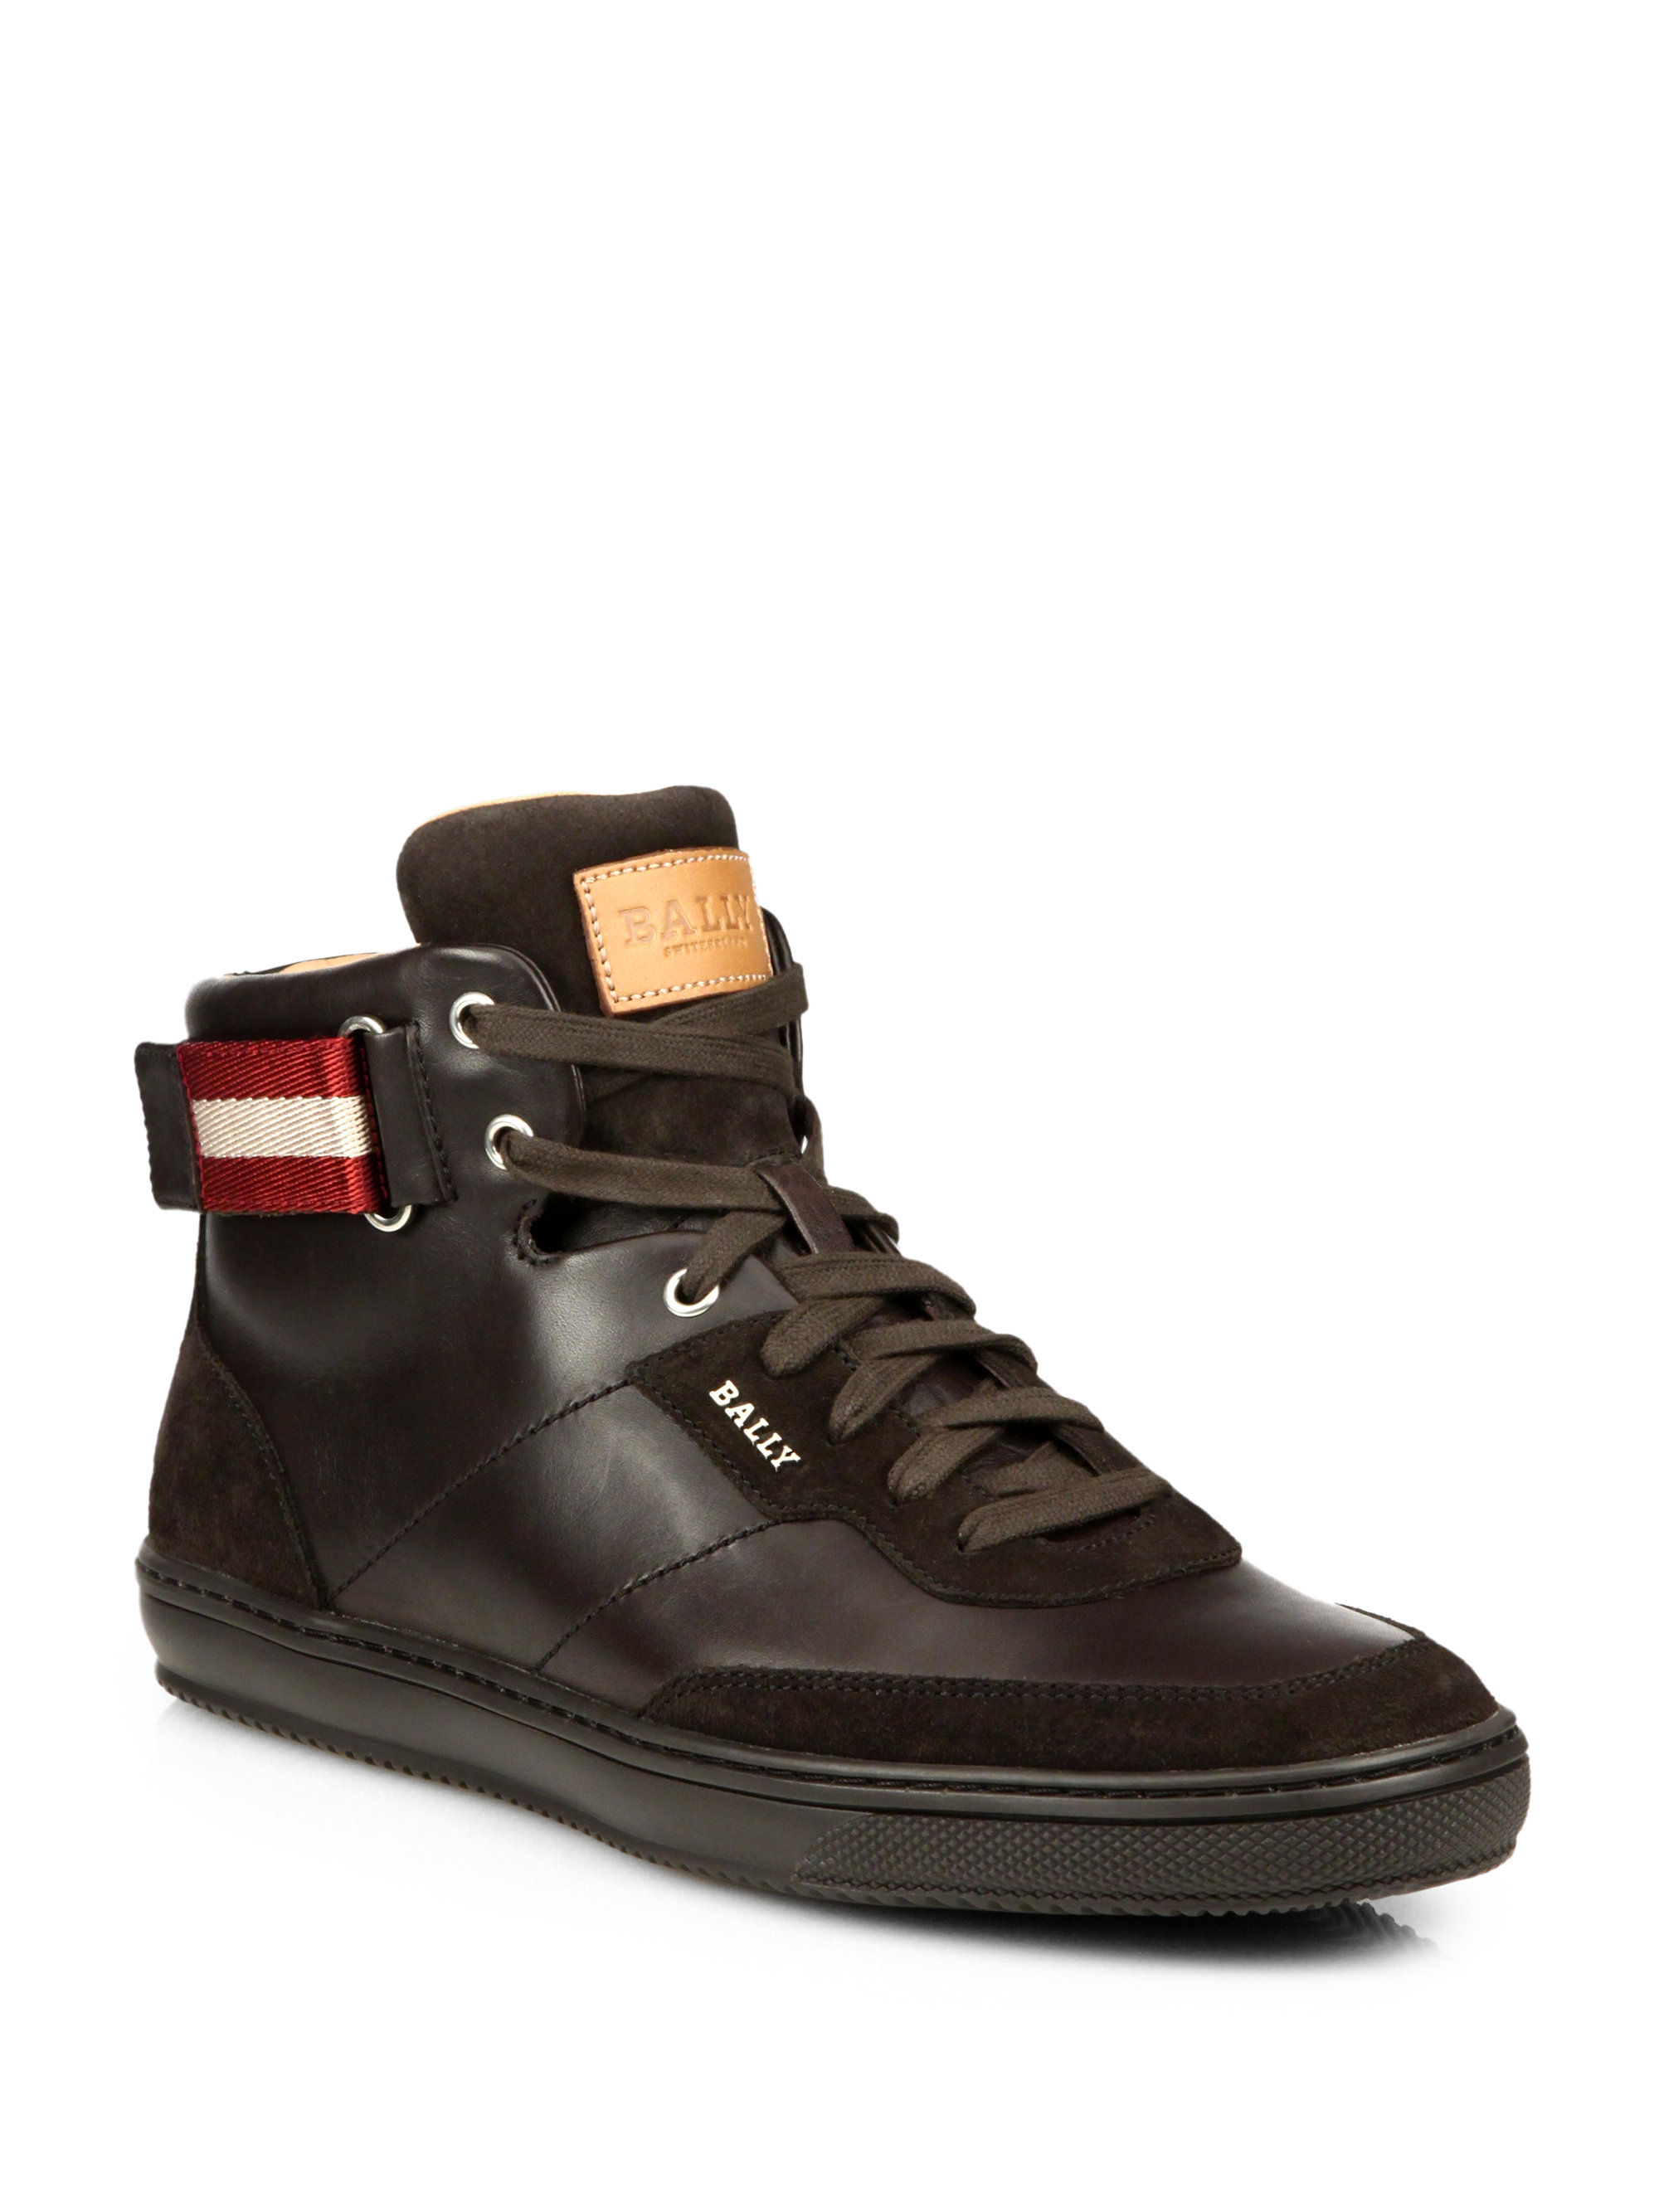 Bally Olsen Leather & Suede High-Top Sneakers in Brown for Men - Lyst